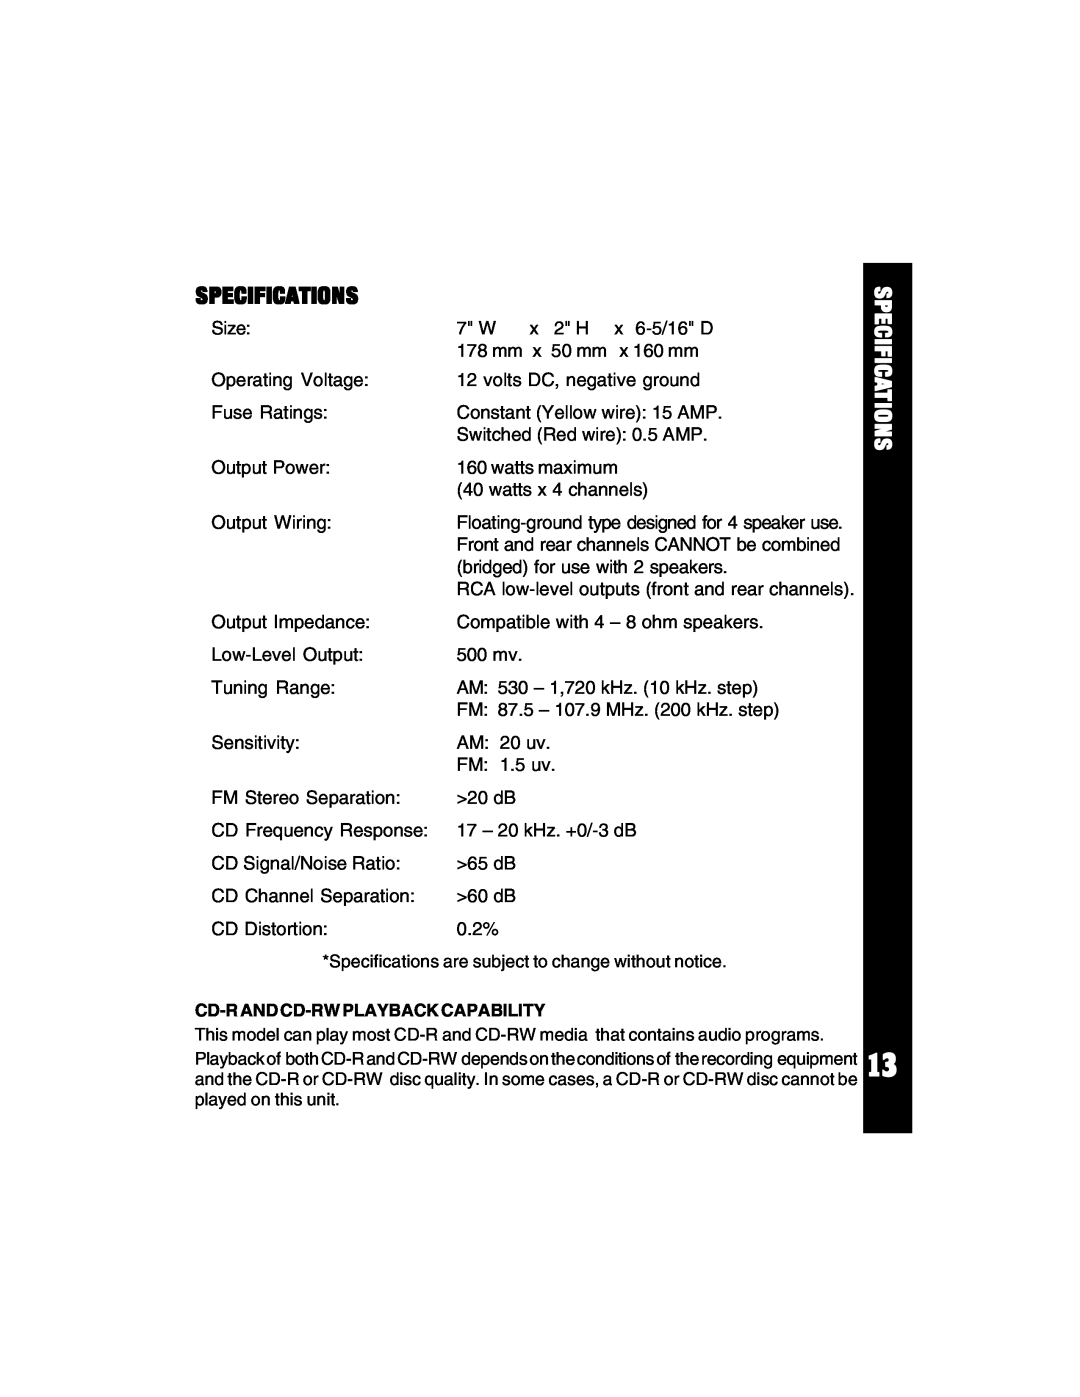 Auto Page ACD-94 manual Specifications 